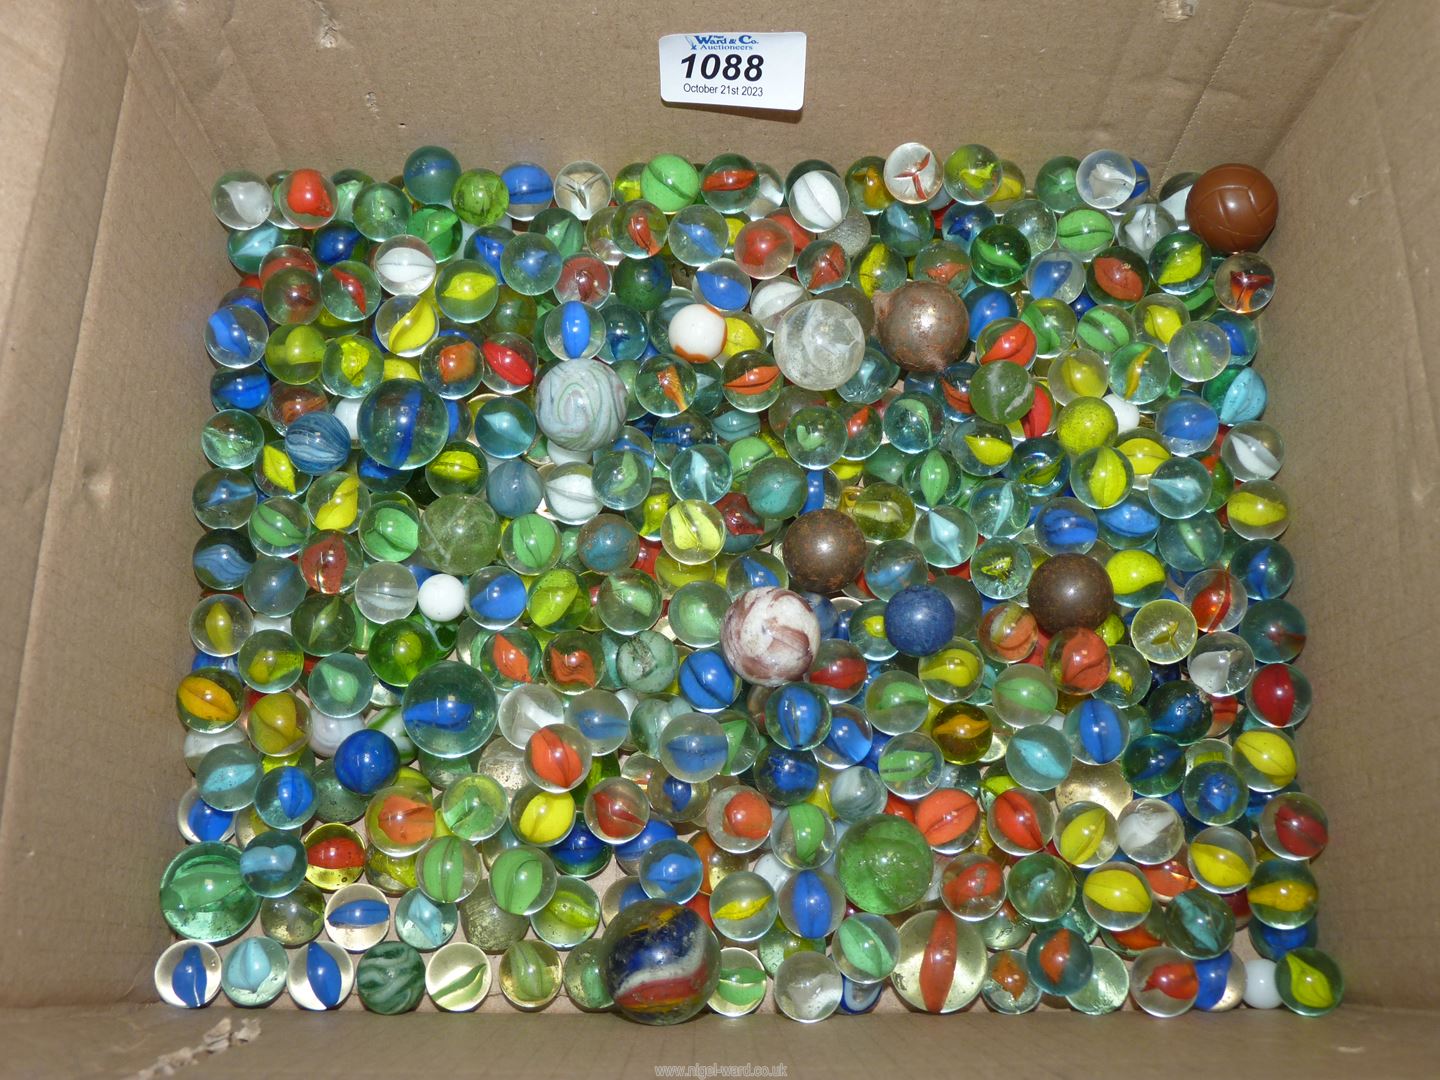 A box of Marbles including large marbled, steel coloured, etc.